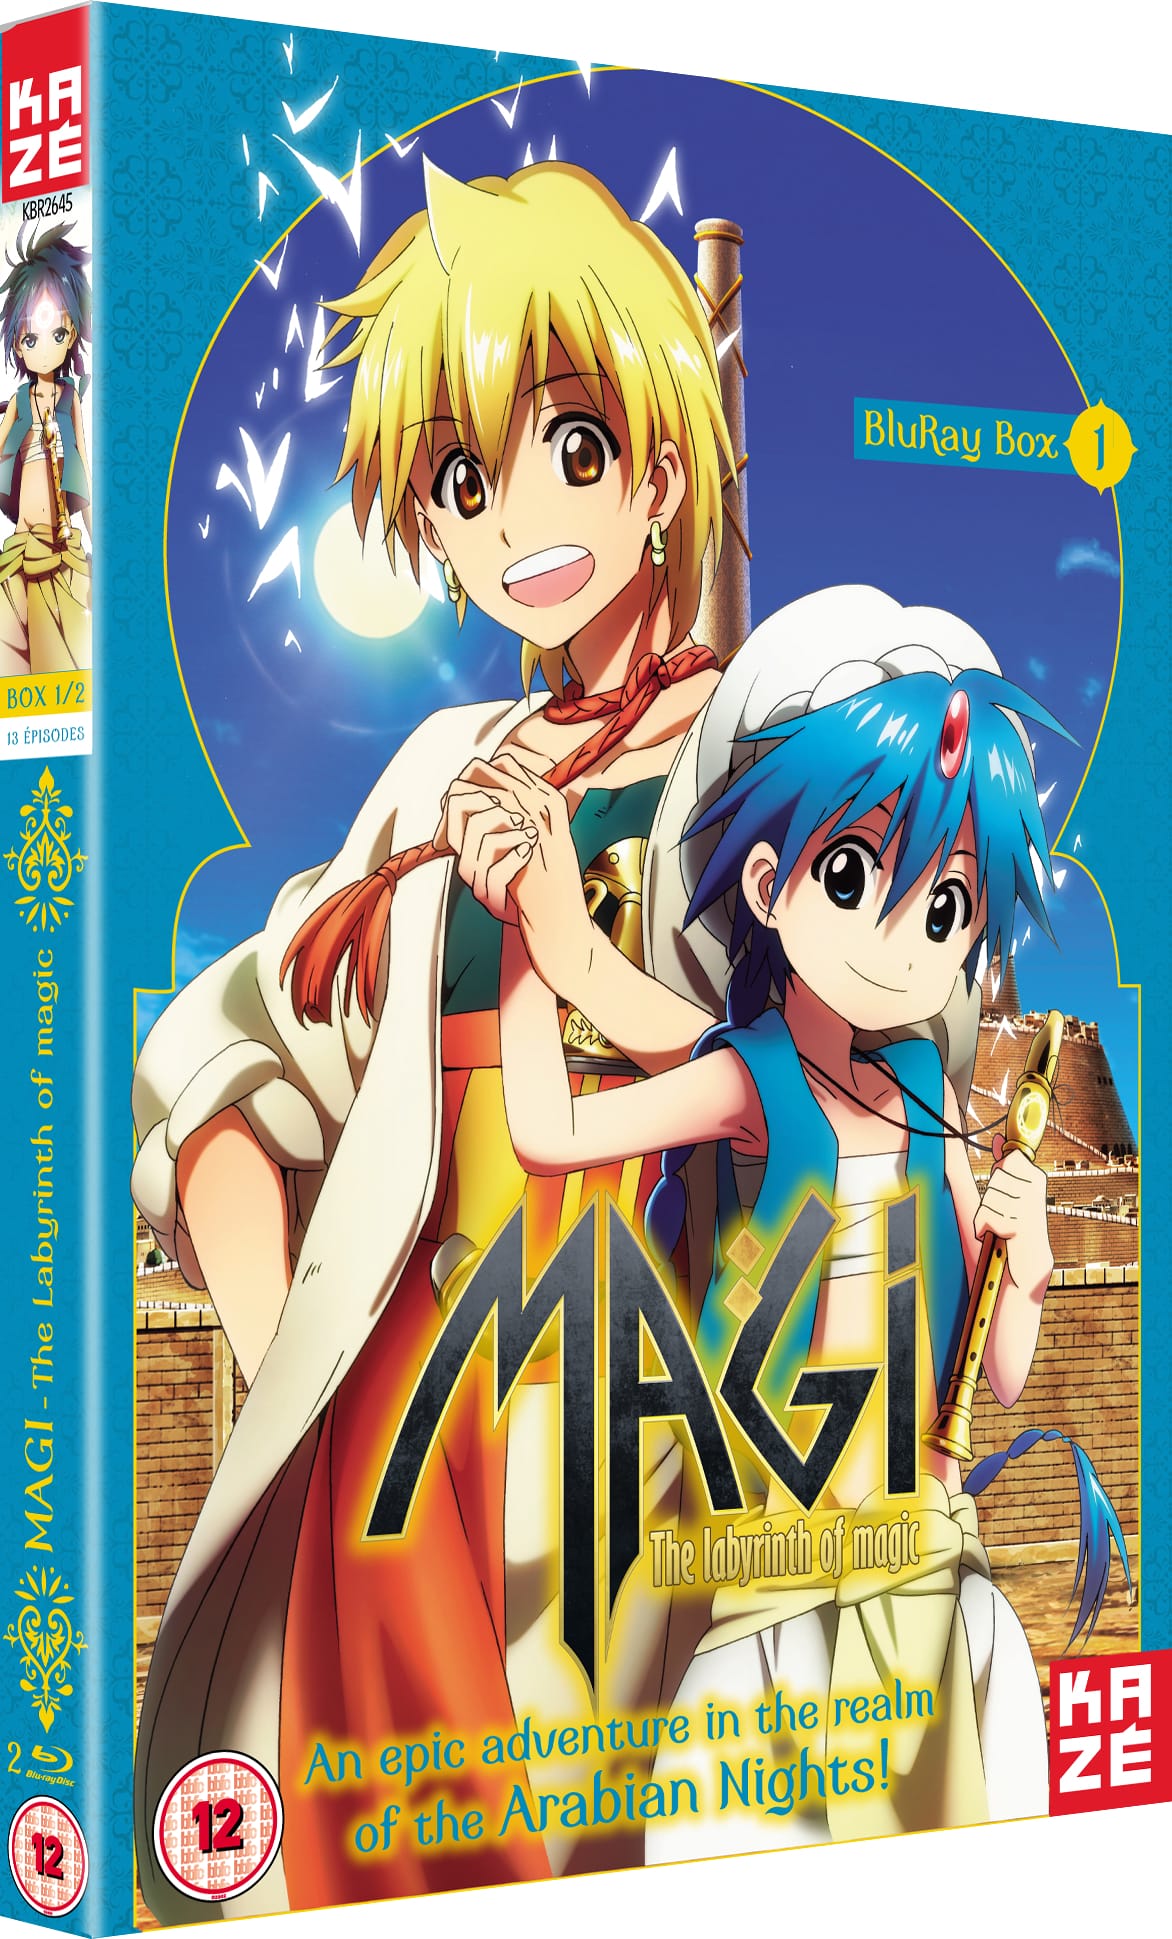 Odd but catchy: A review of Magi - The Labyrinth of Magic